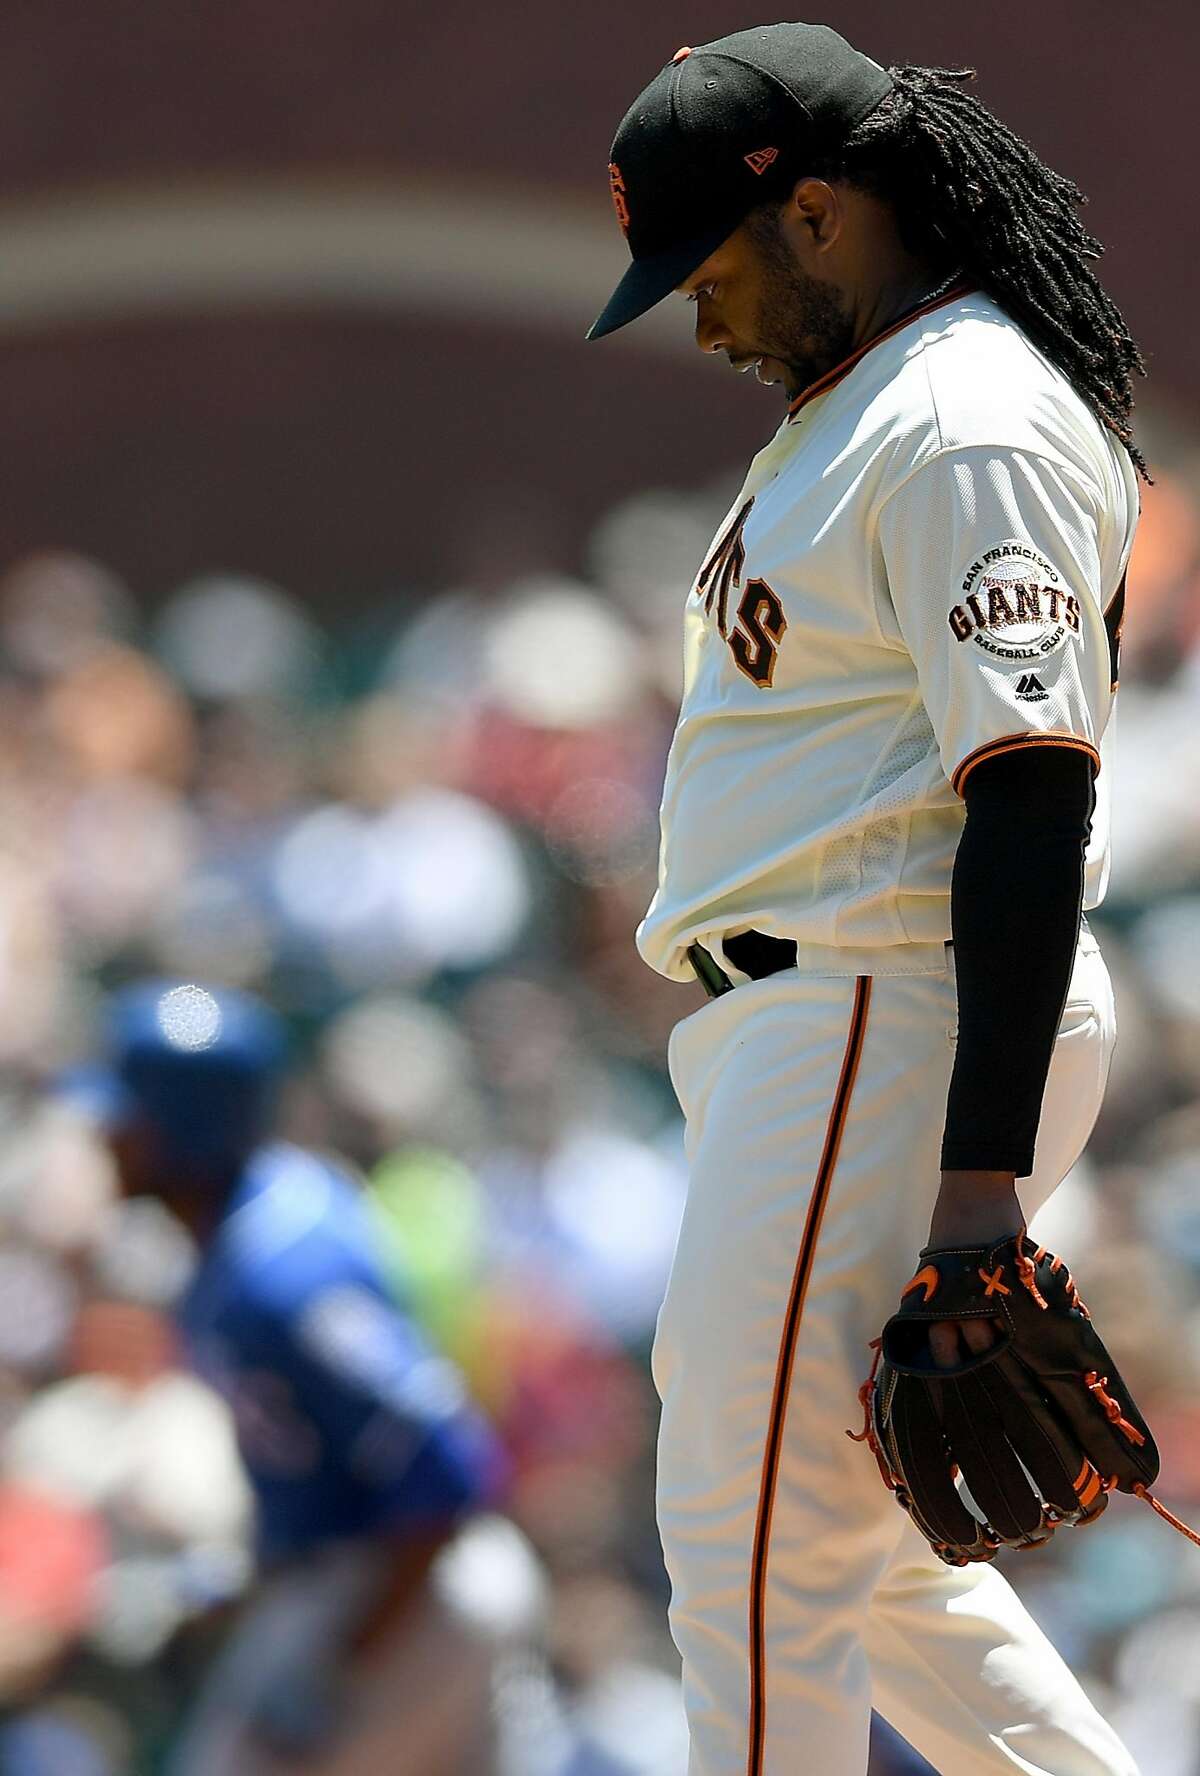 Johnny Cueto #47 of the San Francisco Giants reacts after giving up back to back home runs to Jorge Bonifacio #38 and Lorenzo Cain #6 of the Kansas City Royals in the top of the third inning at AT&T Park on June 14, 2017 in San Francisco, California. (Photo by Thearon W. Henderson/Getty Images)